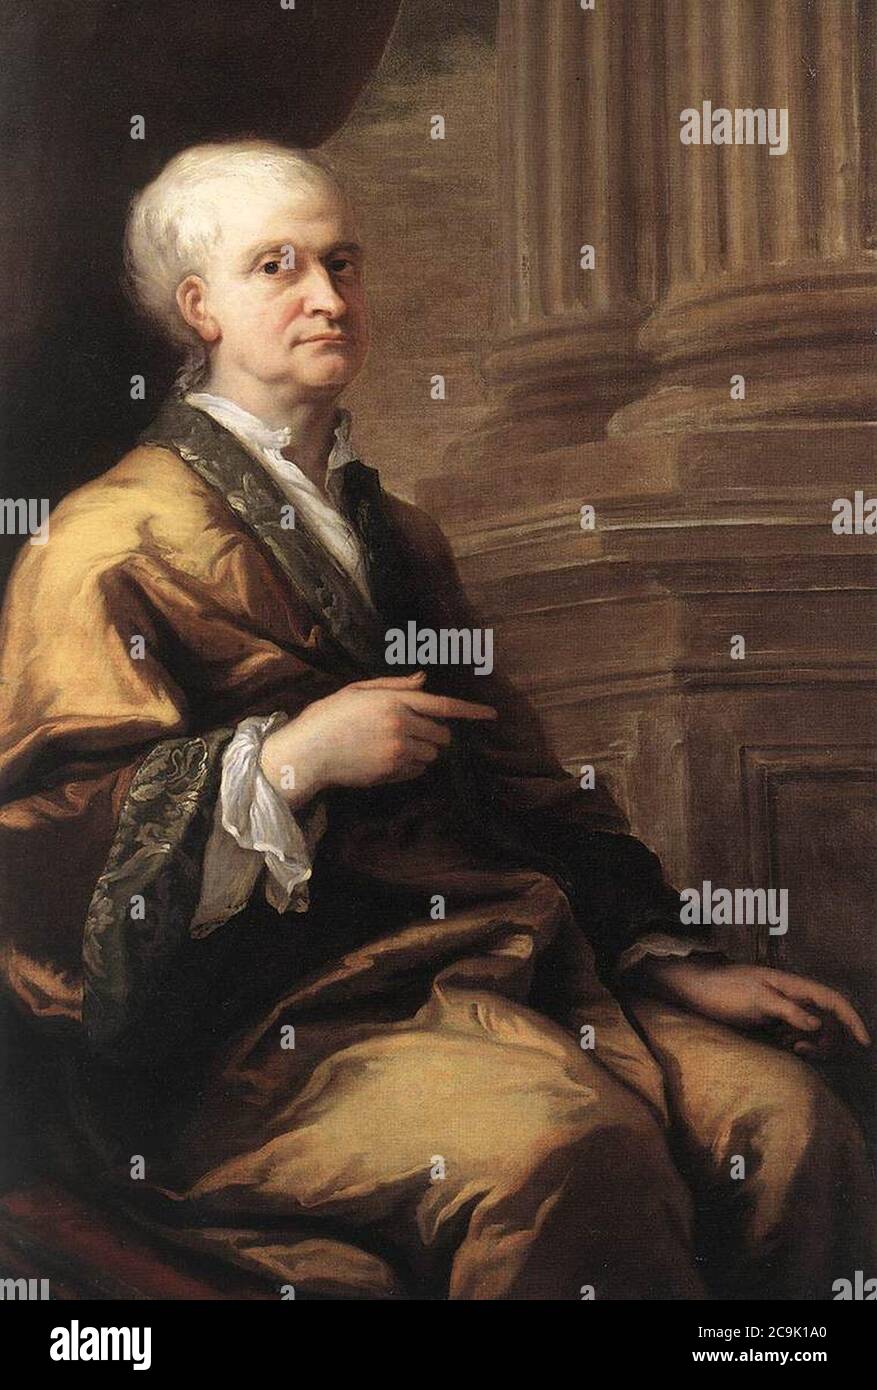 1600s ENGRAVING OF SIR ISAAC NEWTON AS YOUNG MAN SITTING UNDER